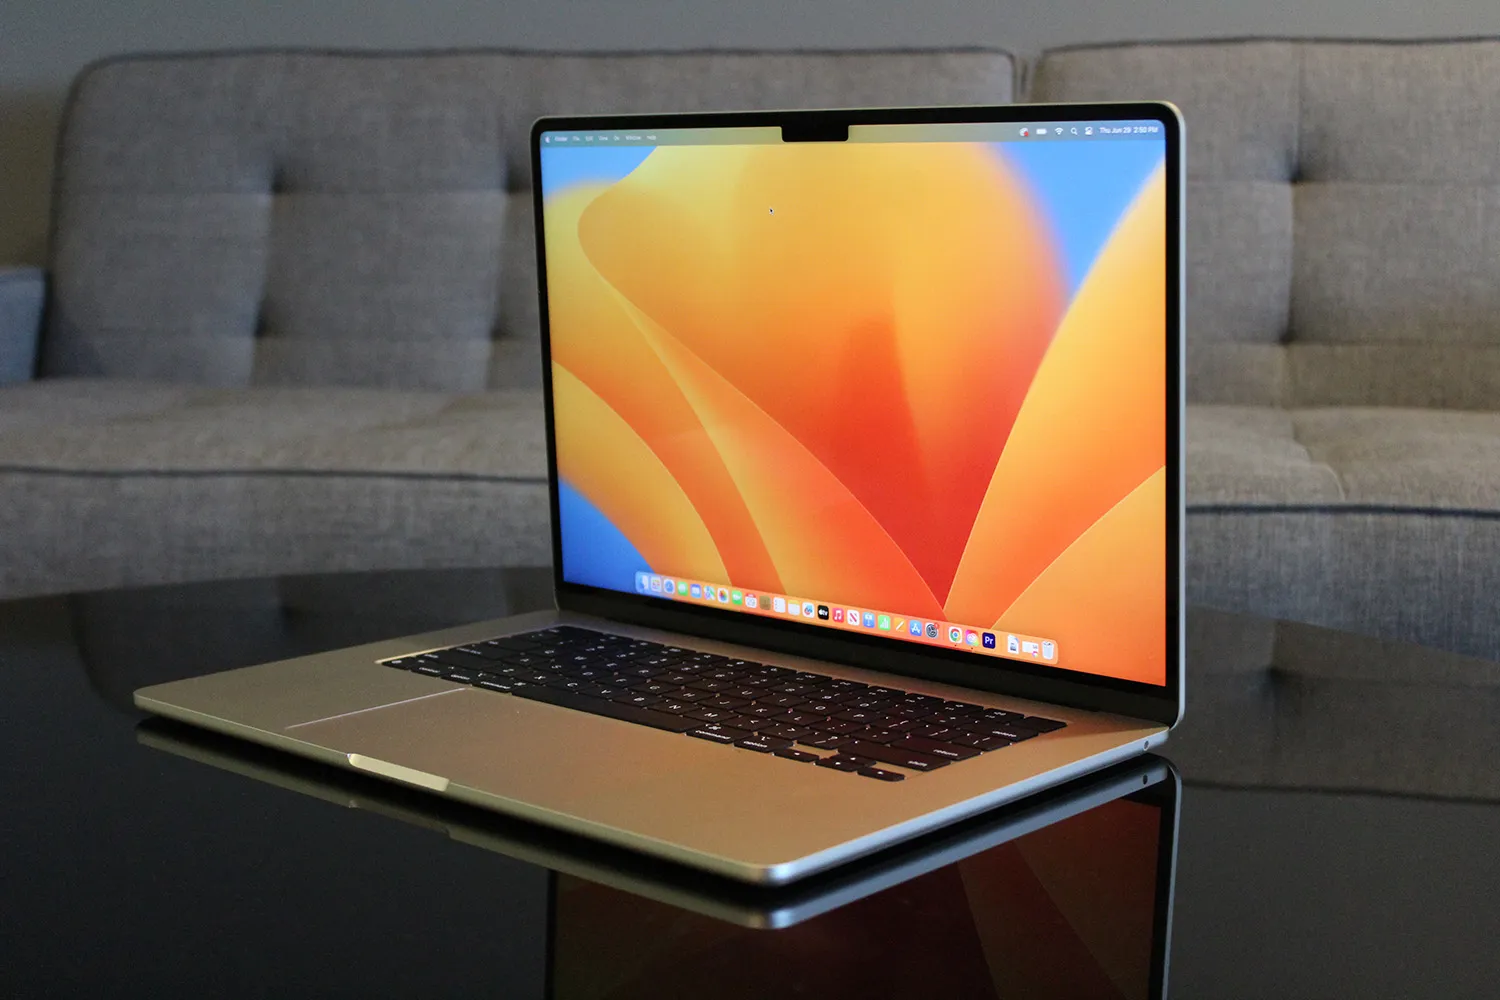 Apple’s 15-inch MacBook Air placed on a desk.